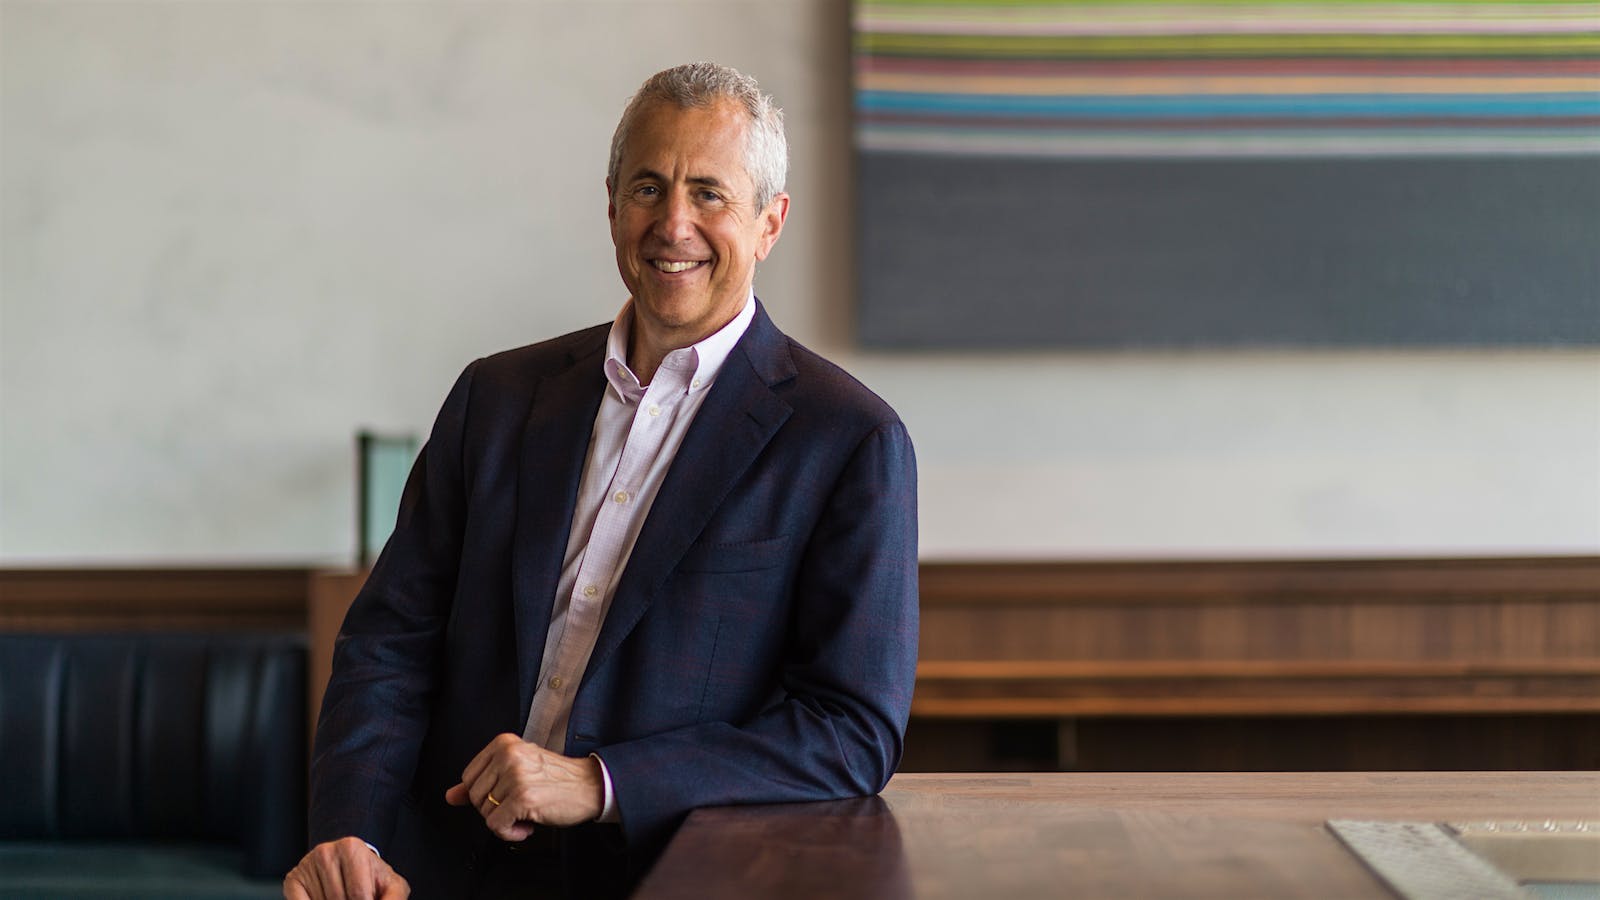 The Show Reopens: Danny Meyer Chats Live on Bringing New York Restaurants Back